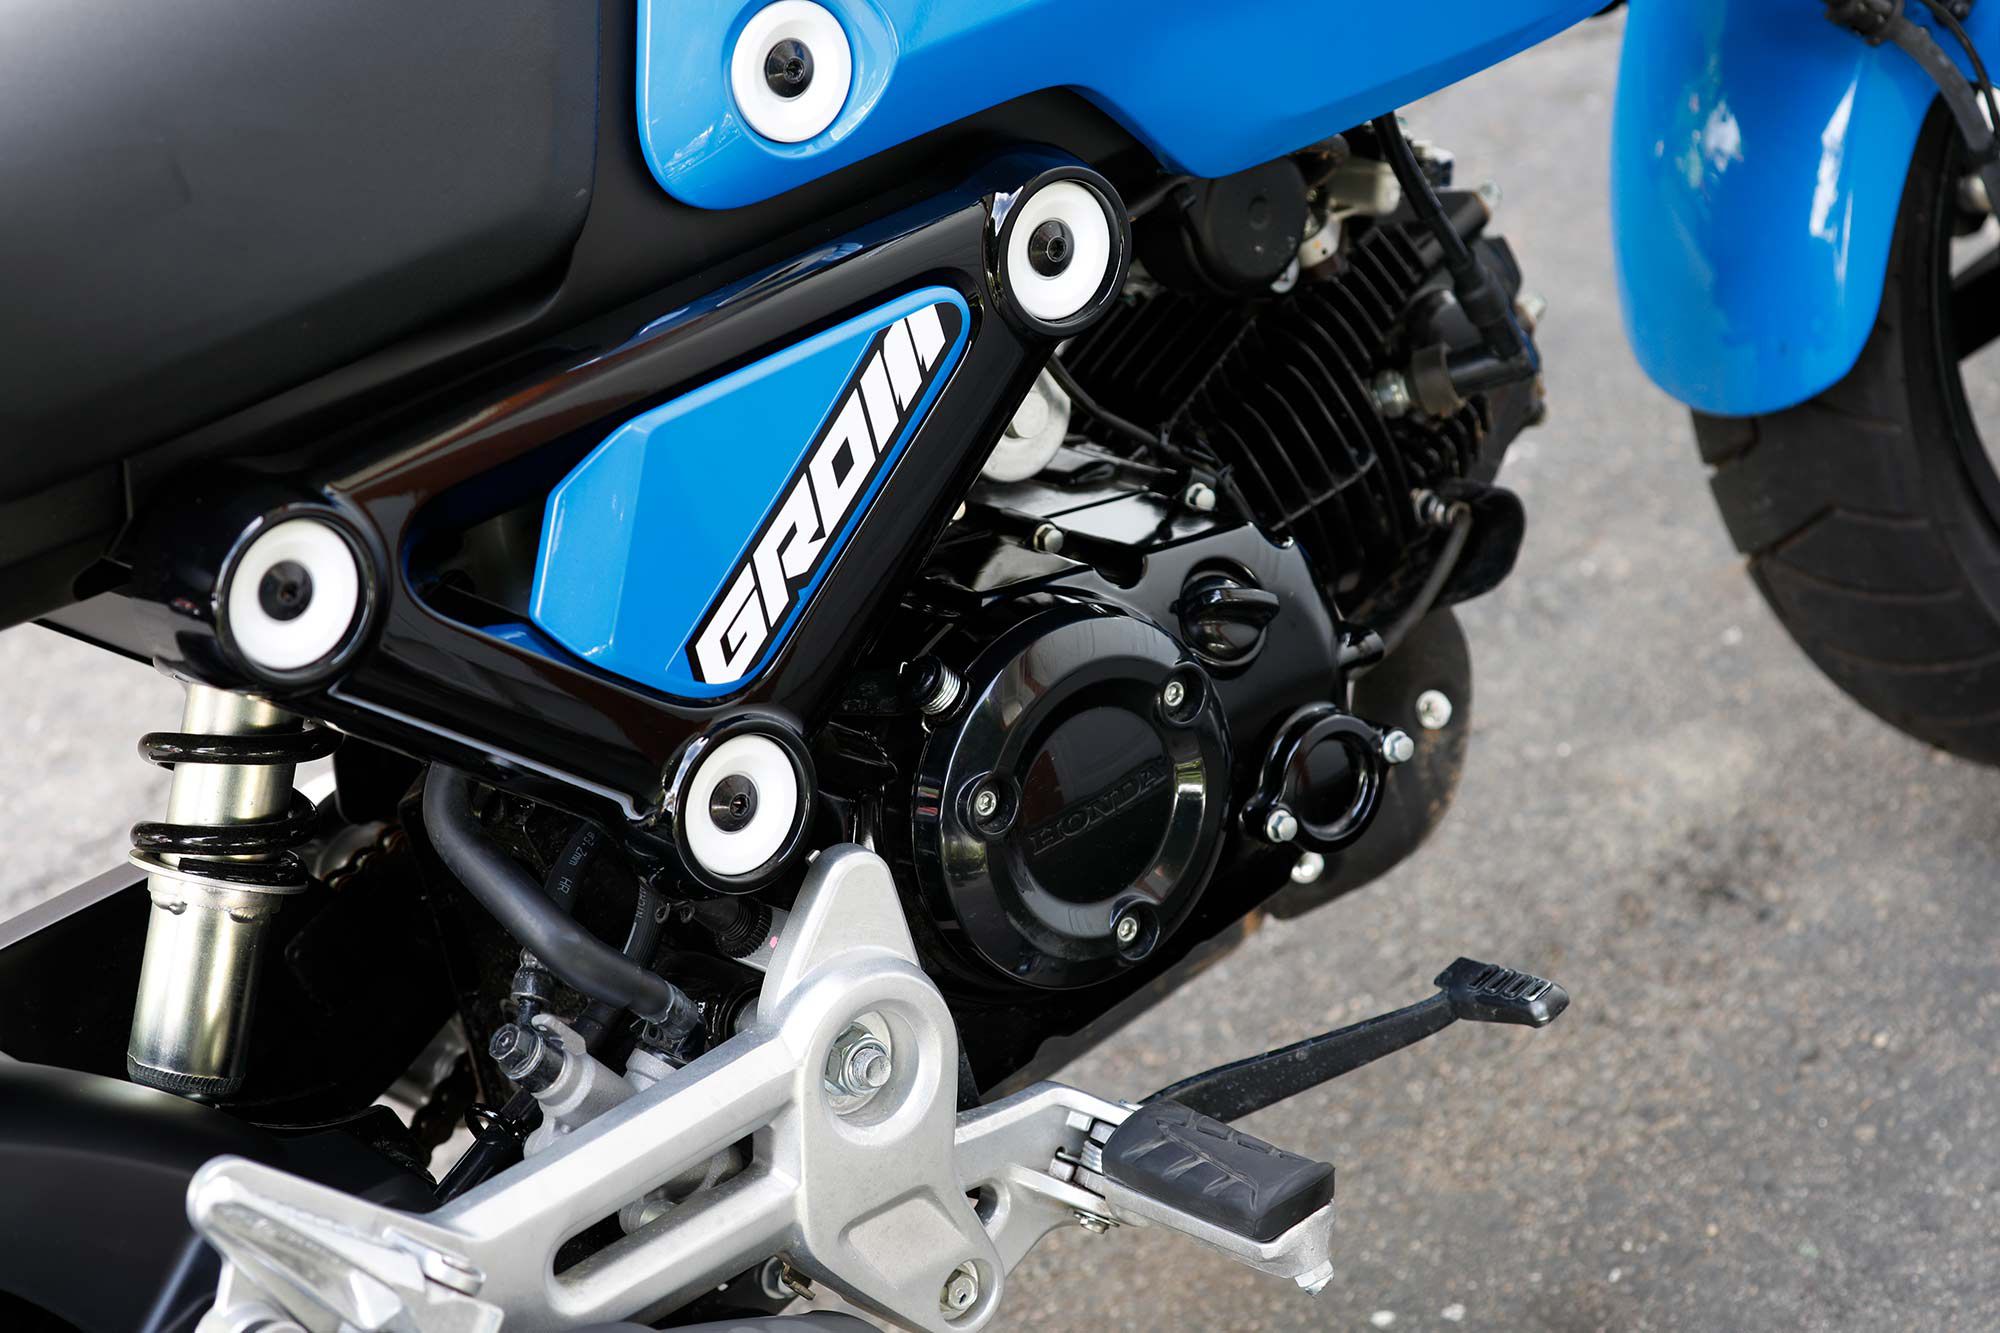 The Grom benefits from a more undersquare air-cooled single with a five-speed transmission. A replaceable oil filter is also integrated into the engine case.